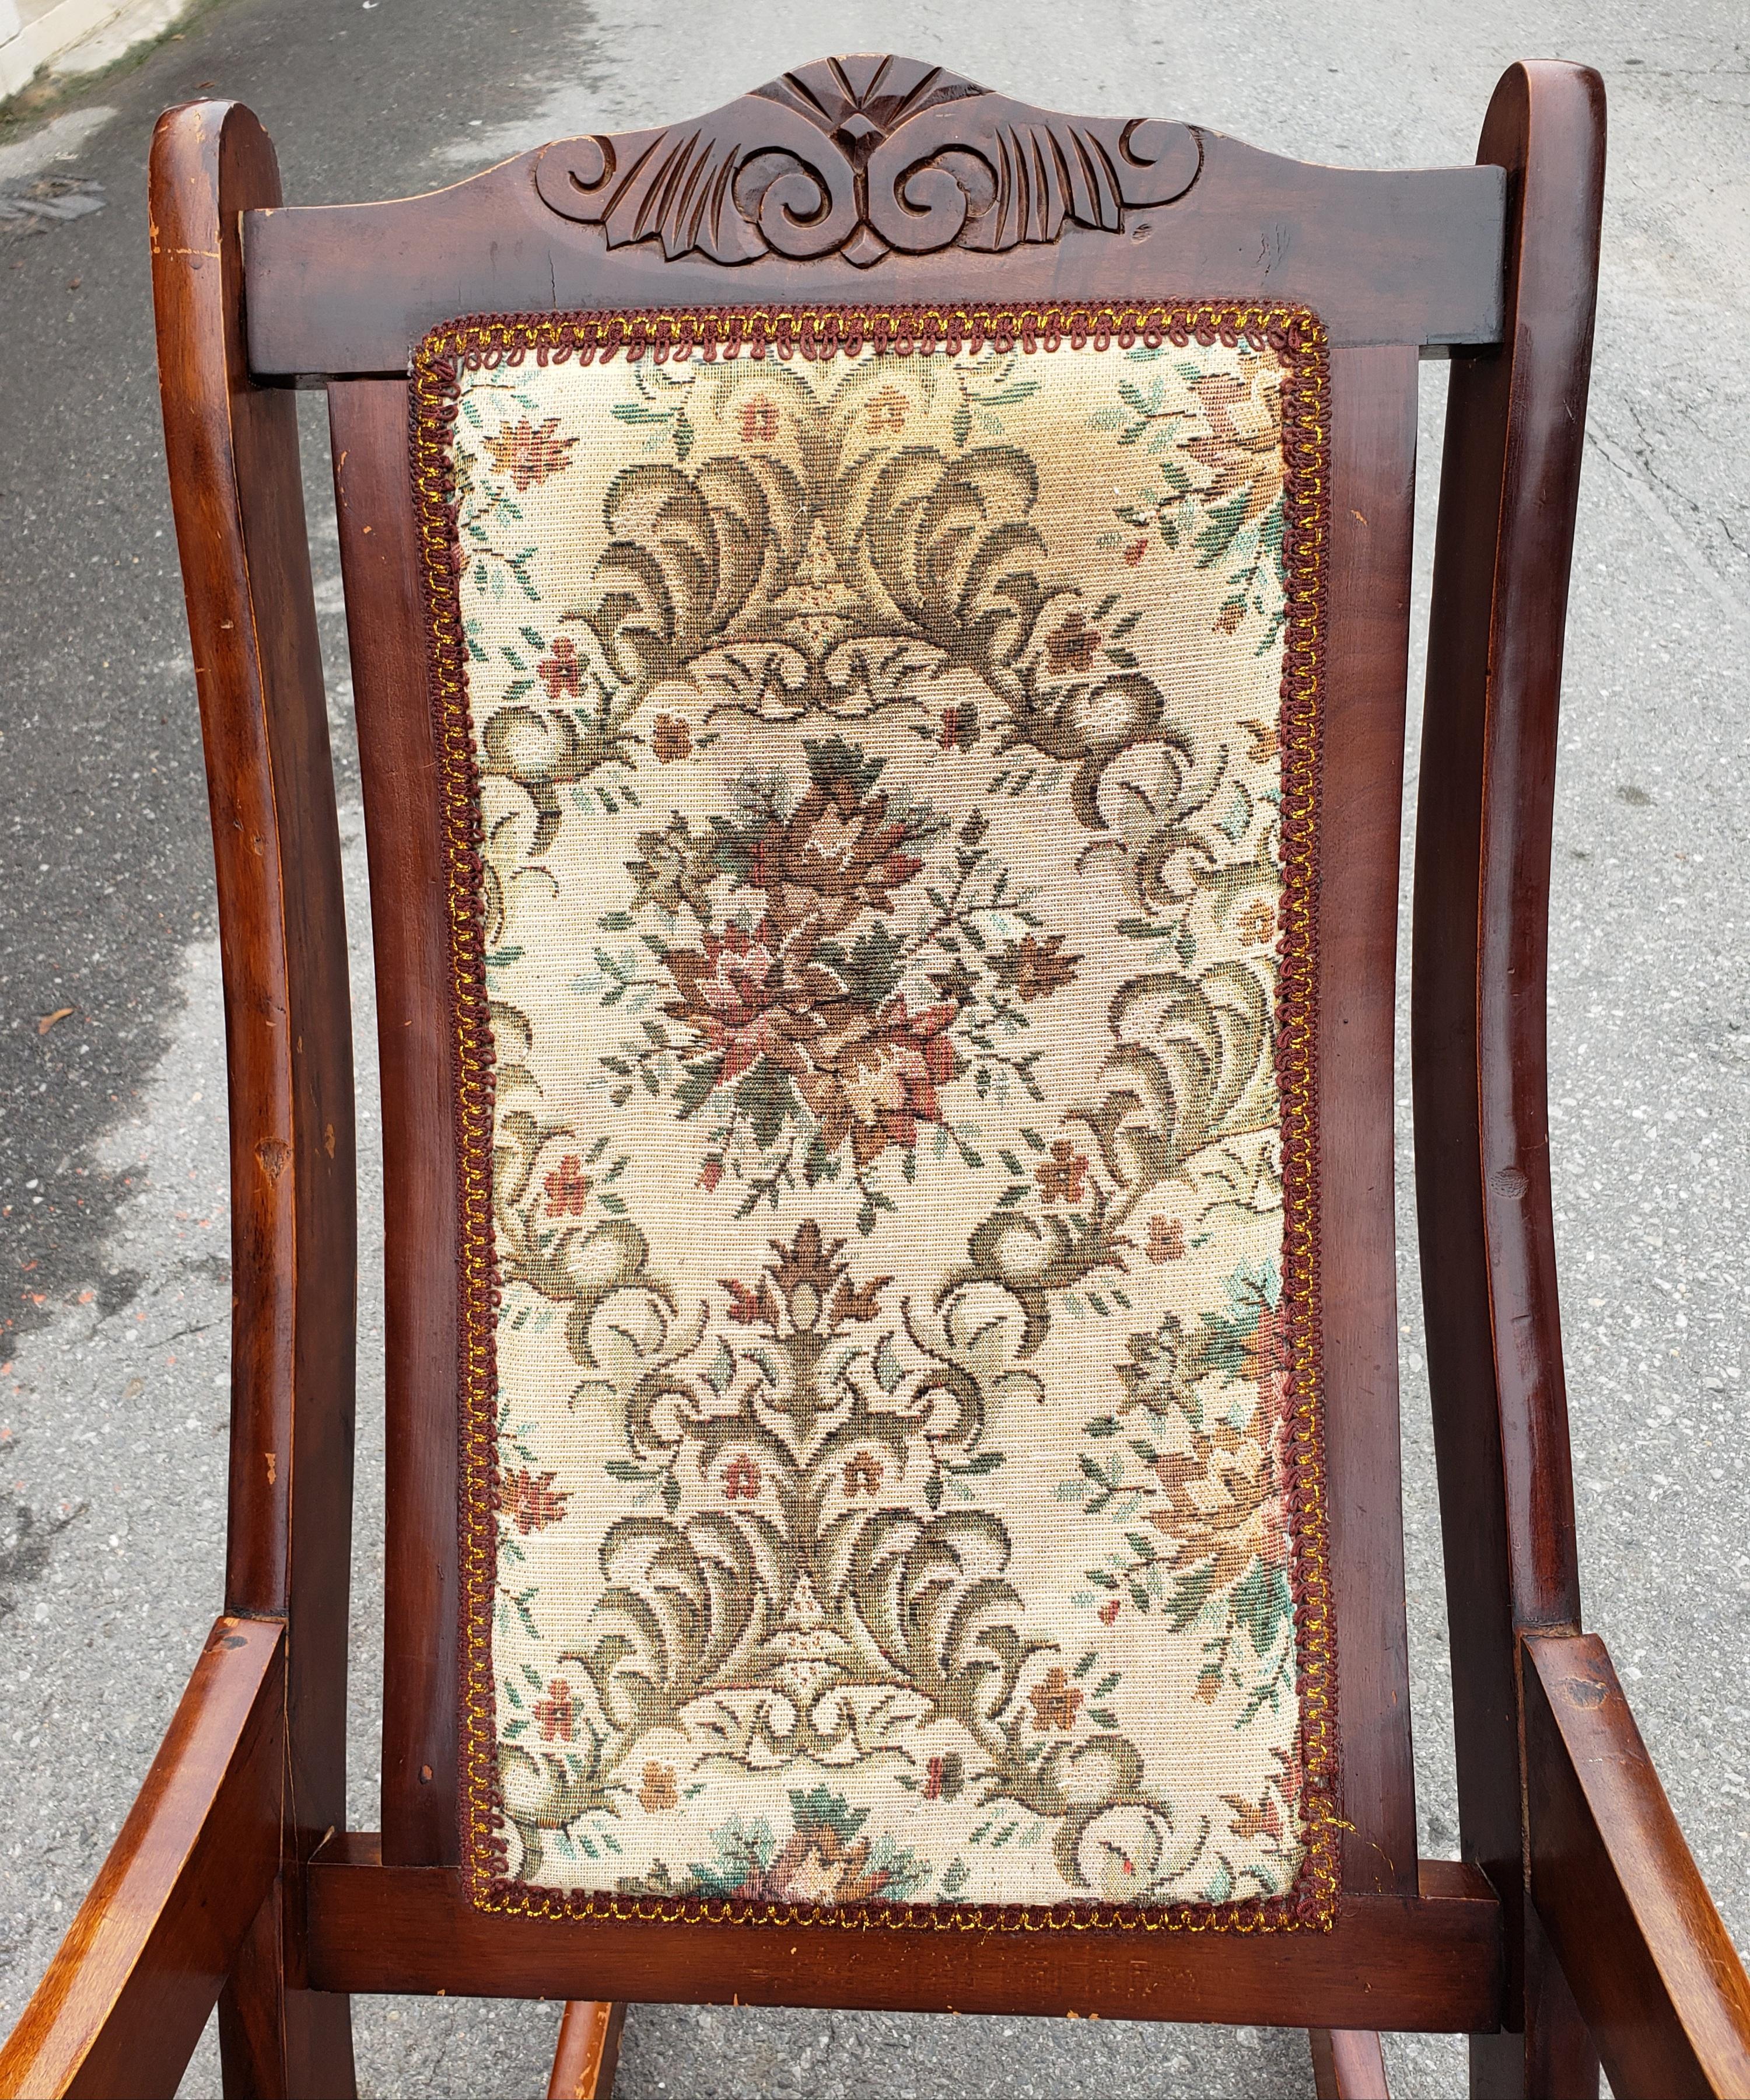 Needlework 1910s Antique Biedermeier Rocking Chair in Mahogany and Needle Point Upholstery